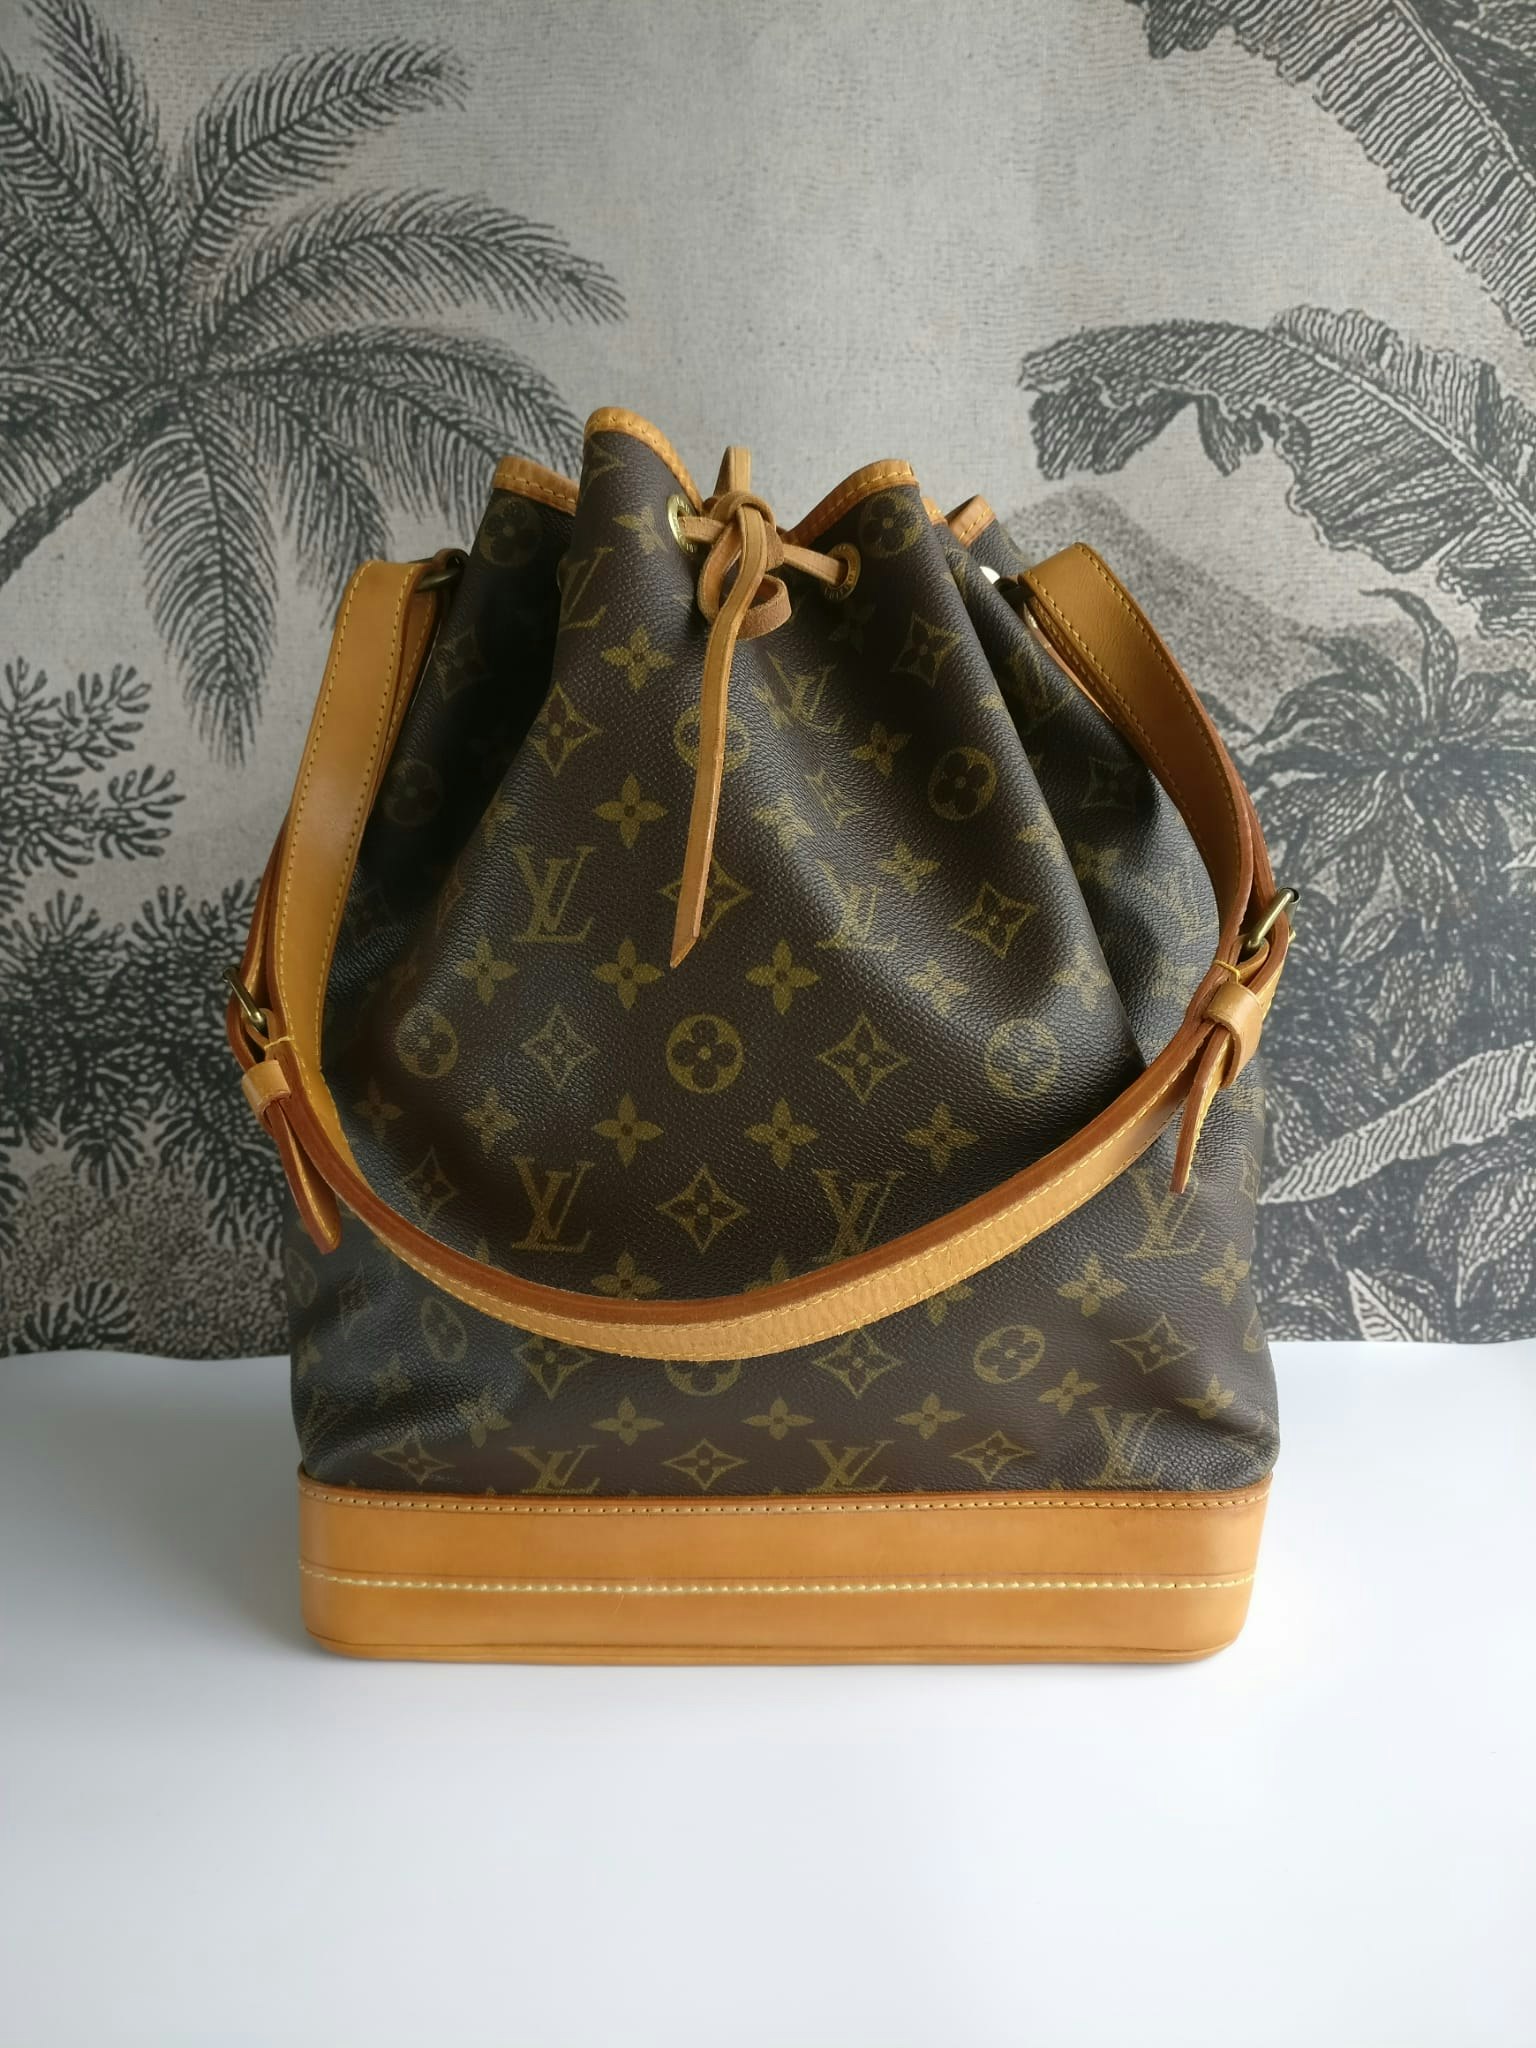 MY FIRST VINTAGE PURCHASE: THE LOUIS VUITTON NOE GM - CHARLOTTE